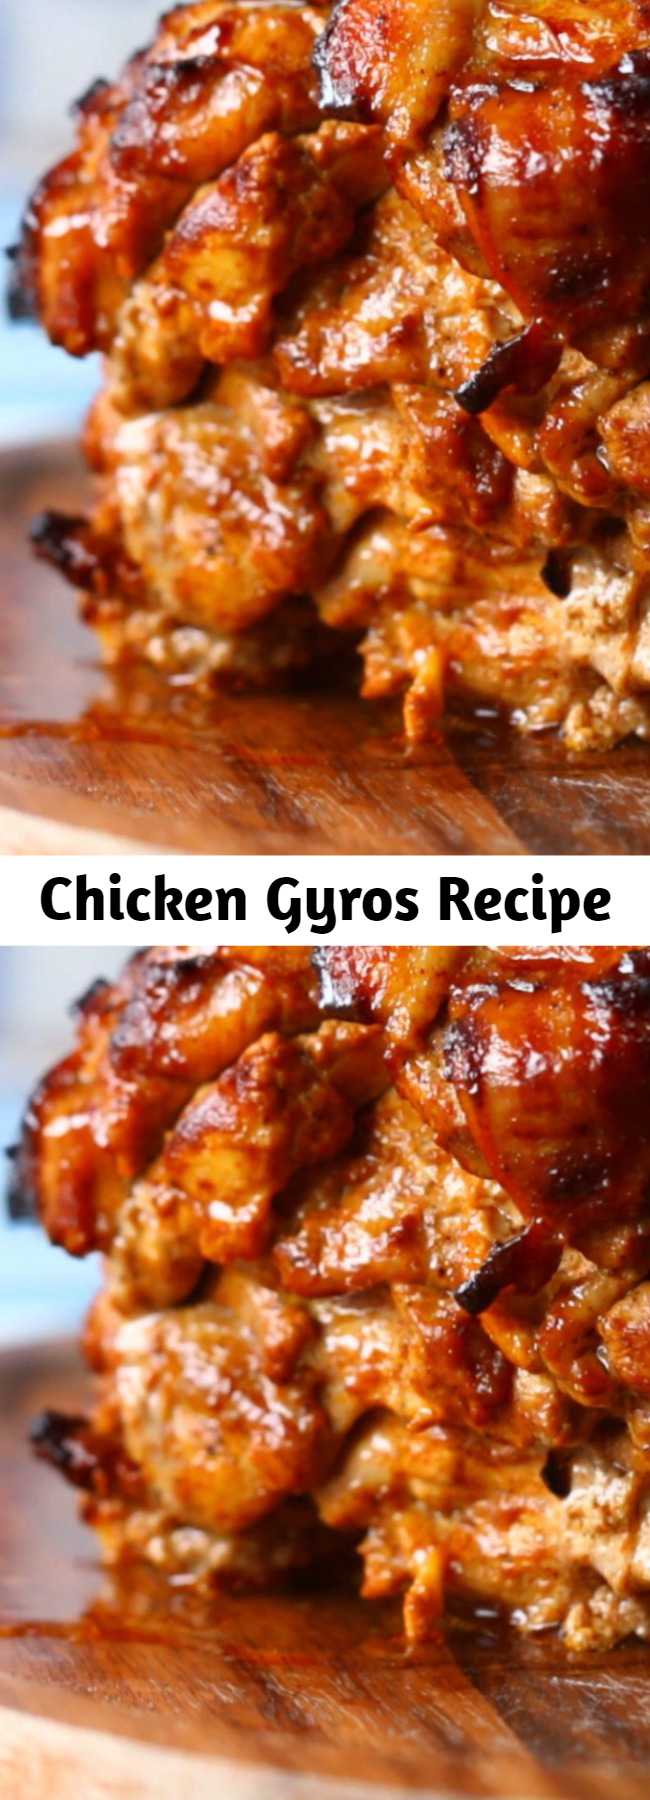 Chicken Gyros Recipe - The marinade for the chicken is so sensational that I use it even when I'm not making Gyros! This is fantastic for entertaining because you can just lay it all out for guests to help themselves. The smell when the chicken is cooking is incredible - you can really smell the oregano and garlic!